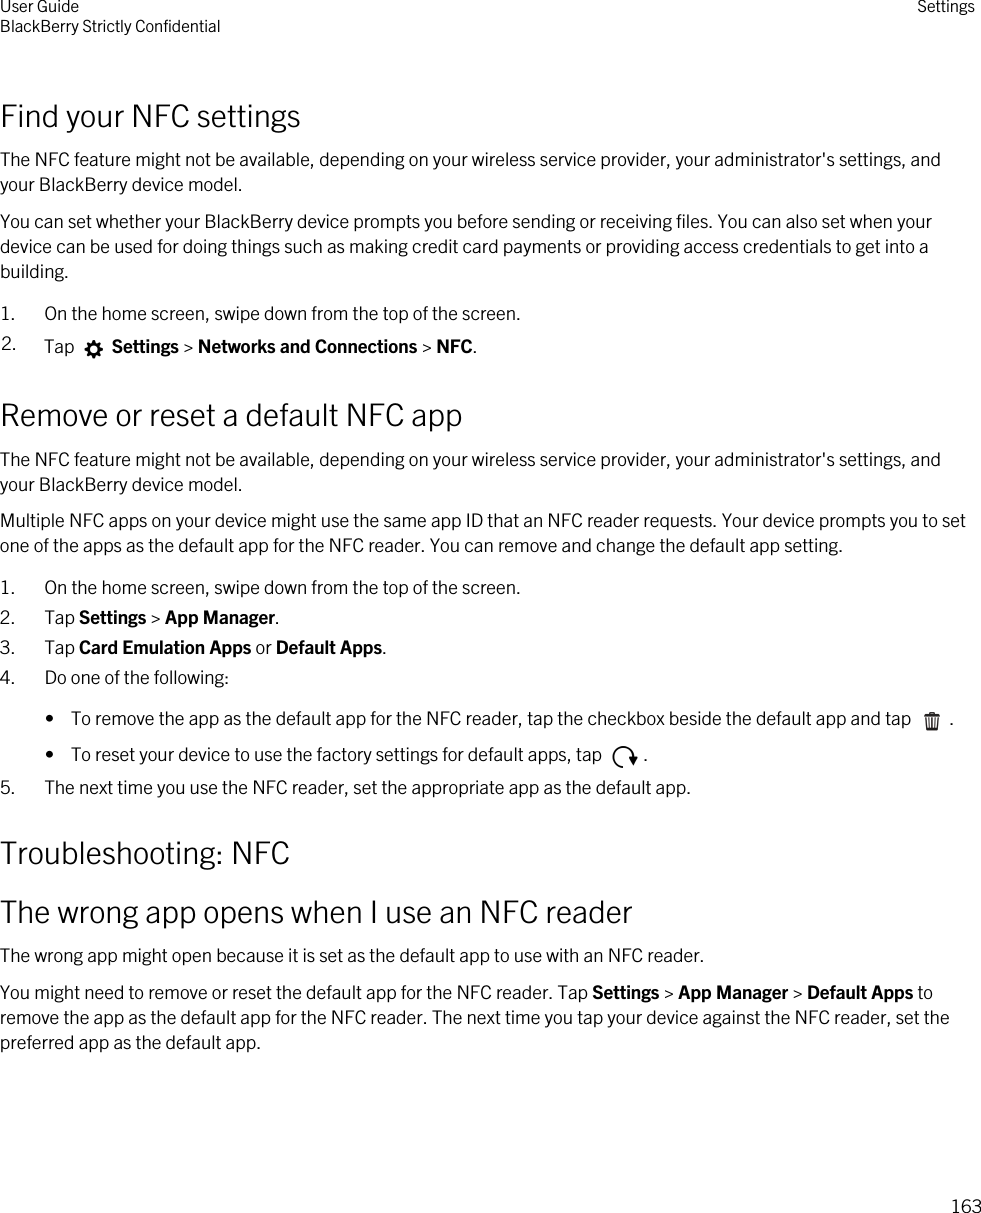 Find your NFC settingsThe NFC feature might not be available, depending on your wireless service provider, your administrator&apos;s settings, and your BlackBerry device model.You can set whether your BlackBerry device prompts you before sending or receiving files. You can also set when your device can be used for doing things such as making credit card payments or providing access credentials to get into a building.1. On the home screen, swipe down from the top of the screen.2. Tap   Settings &gt; Networks and Connections &gt; NFC.Remove or reset a default NFC appThe NFC feature might not be available, depending on your wireless service provider, your administrator&apos;s settings, and your BlackBerry device model.Multiple NFC apps on your device might use the same app ID that an NFC reader requests. Your device prompts you to set one of the apps as the default app for the NFC reader. You can remove and change the default app setting.1. On the home screen, swipe down from the top of the screen.2. Tap Settings &gt; App Manager.3. Tap Card Emulation Apps or Default Apps.4. Do one of the following:•  To remove the app as the default app for the NFC reader, tap the checkbox beside the default app and tap  .•  To reset your device to use the factory settings for default apps, tap  .5. The next time you use the NFC reader, set the appropriate app as the default app.Troubleshooting: NFCThe wrong app opens when I use an NFC readerThe wrong app might open because it is set as the default app to use with an NFC reader.You might need to remove or reset the default app for the NFC reader. Tap Settings &gt; App Manager &gt; Default Apps to remove the app as the default app for the NFC reader. The next time you tap your device against the NFC reader, set the preferred app as the default app.User GuideBlackBerry Strictly Confidential Settings163